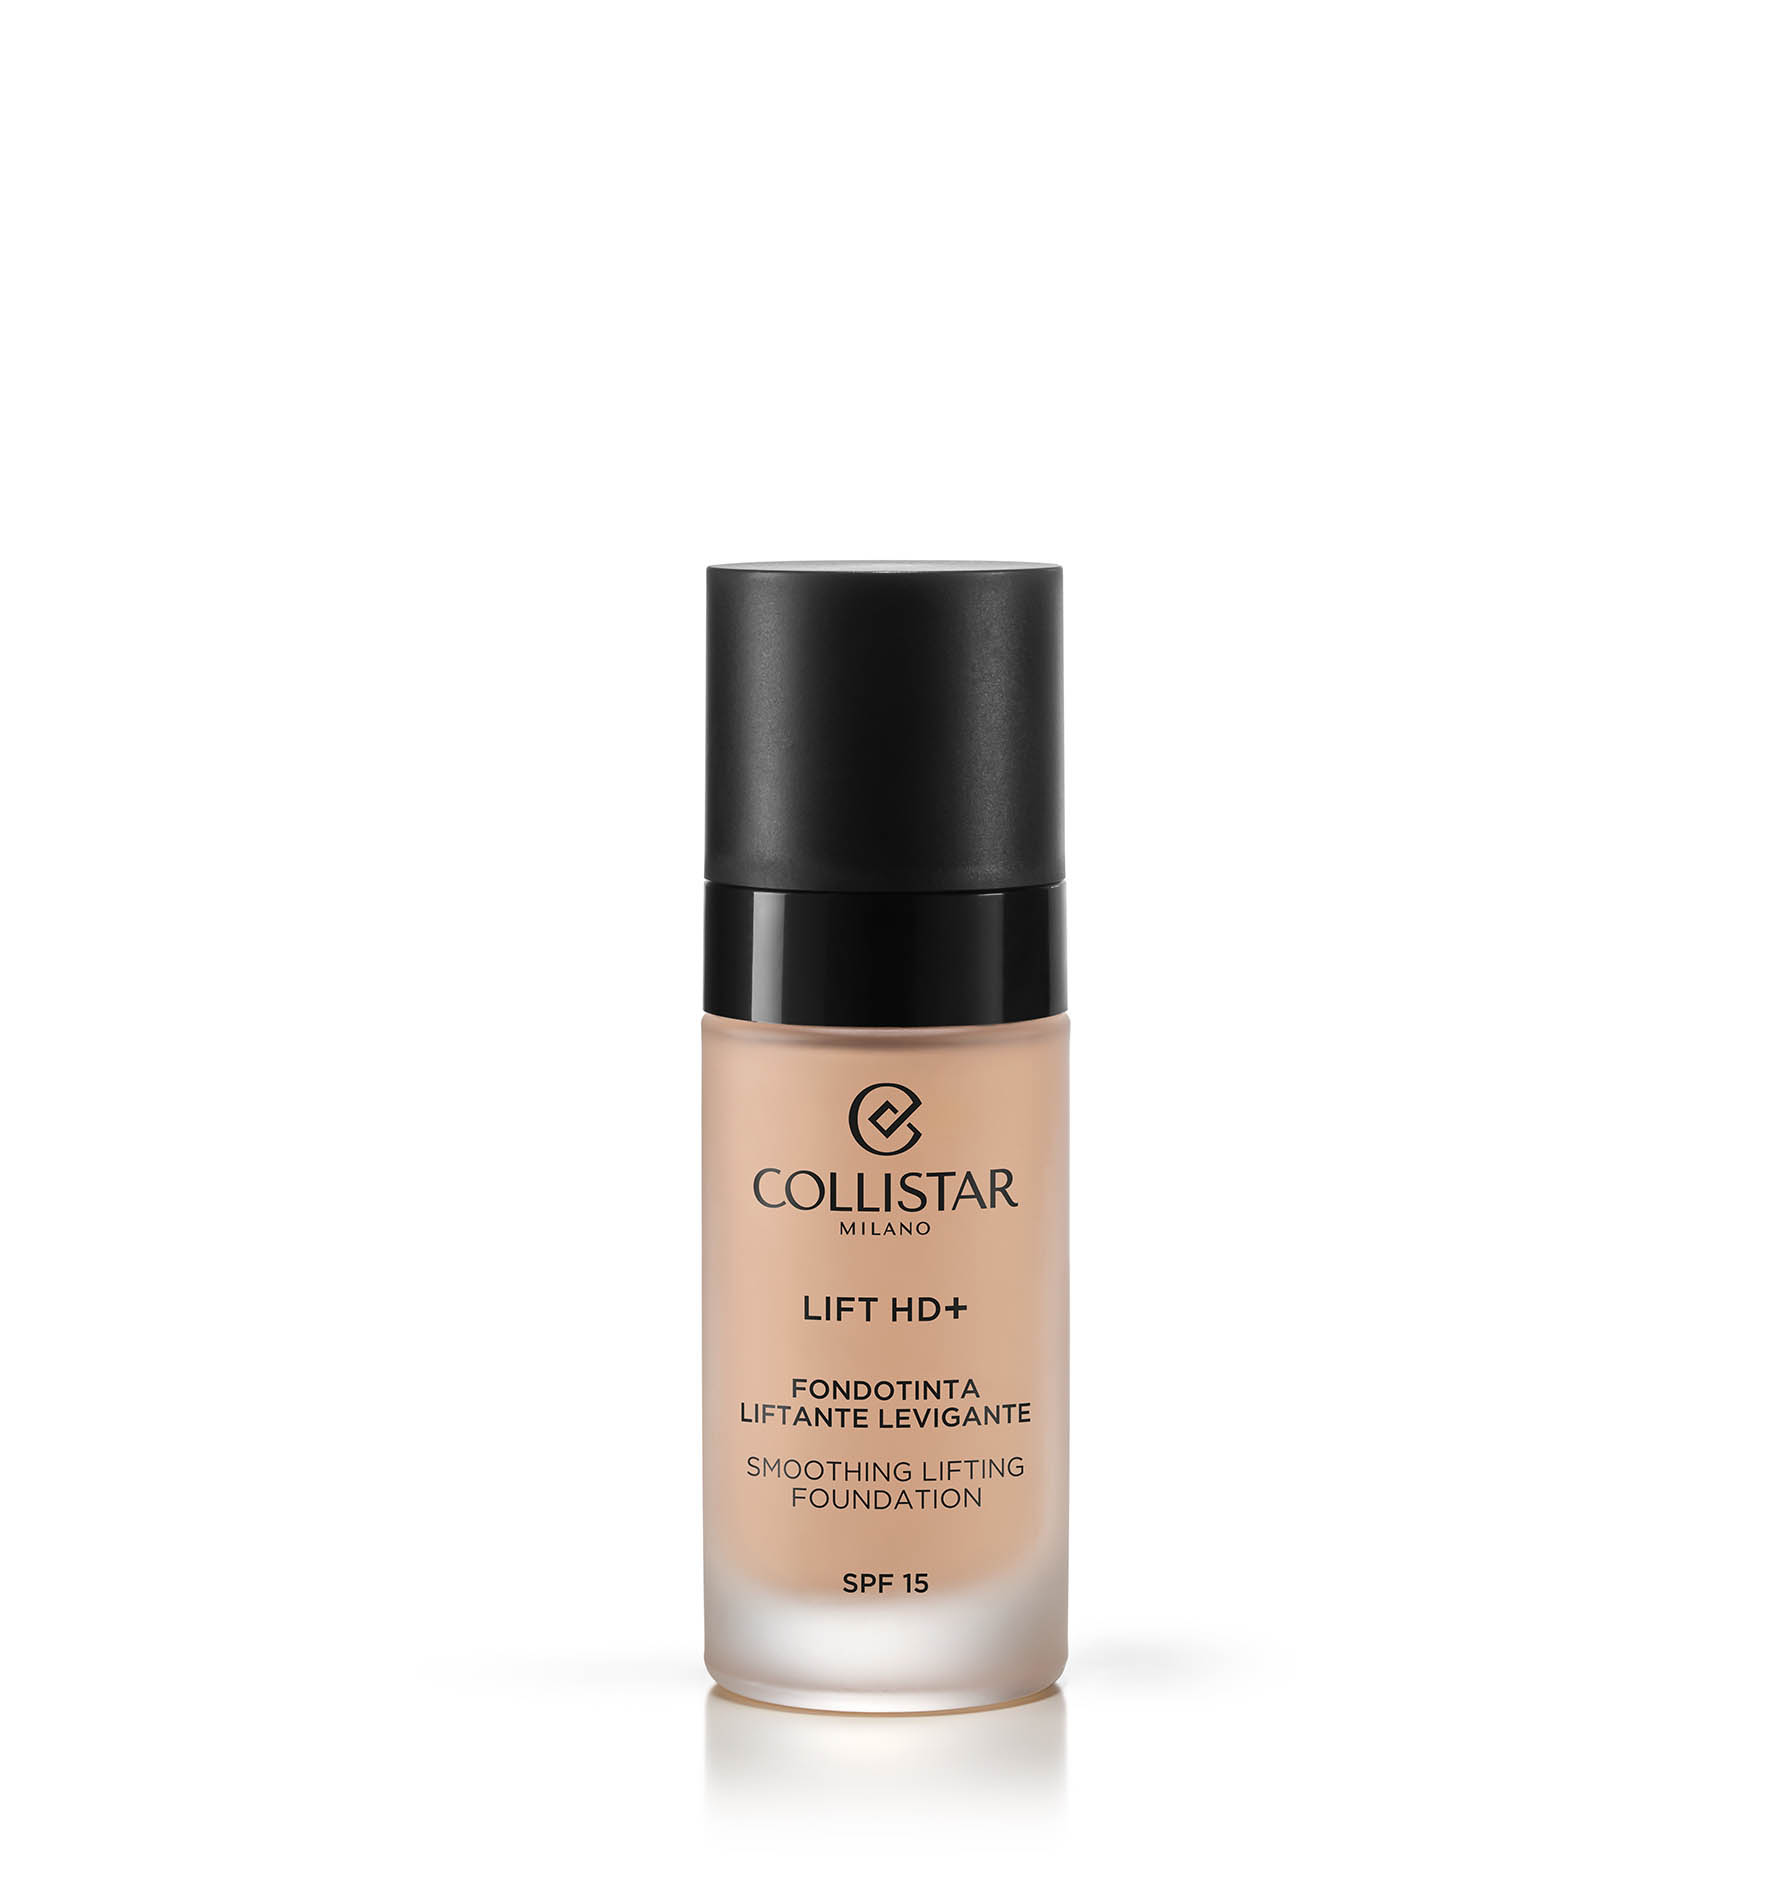 LIFT HD+ SMOOTHING LIFTING FOUNDATION - Foundations and BB creams | Collistar - Shop Online Ufficiale